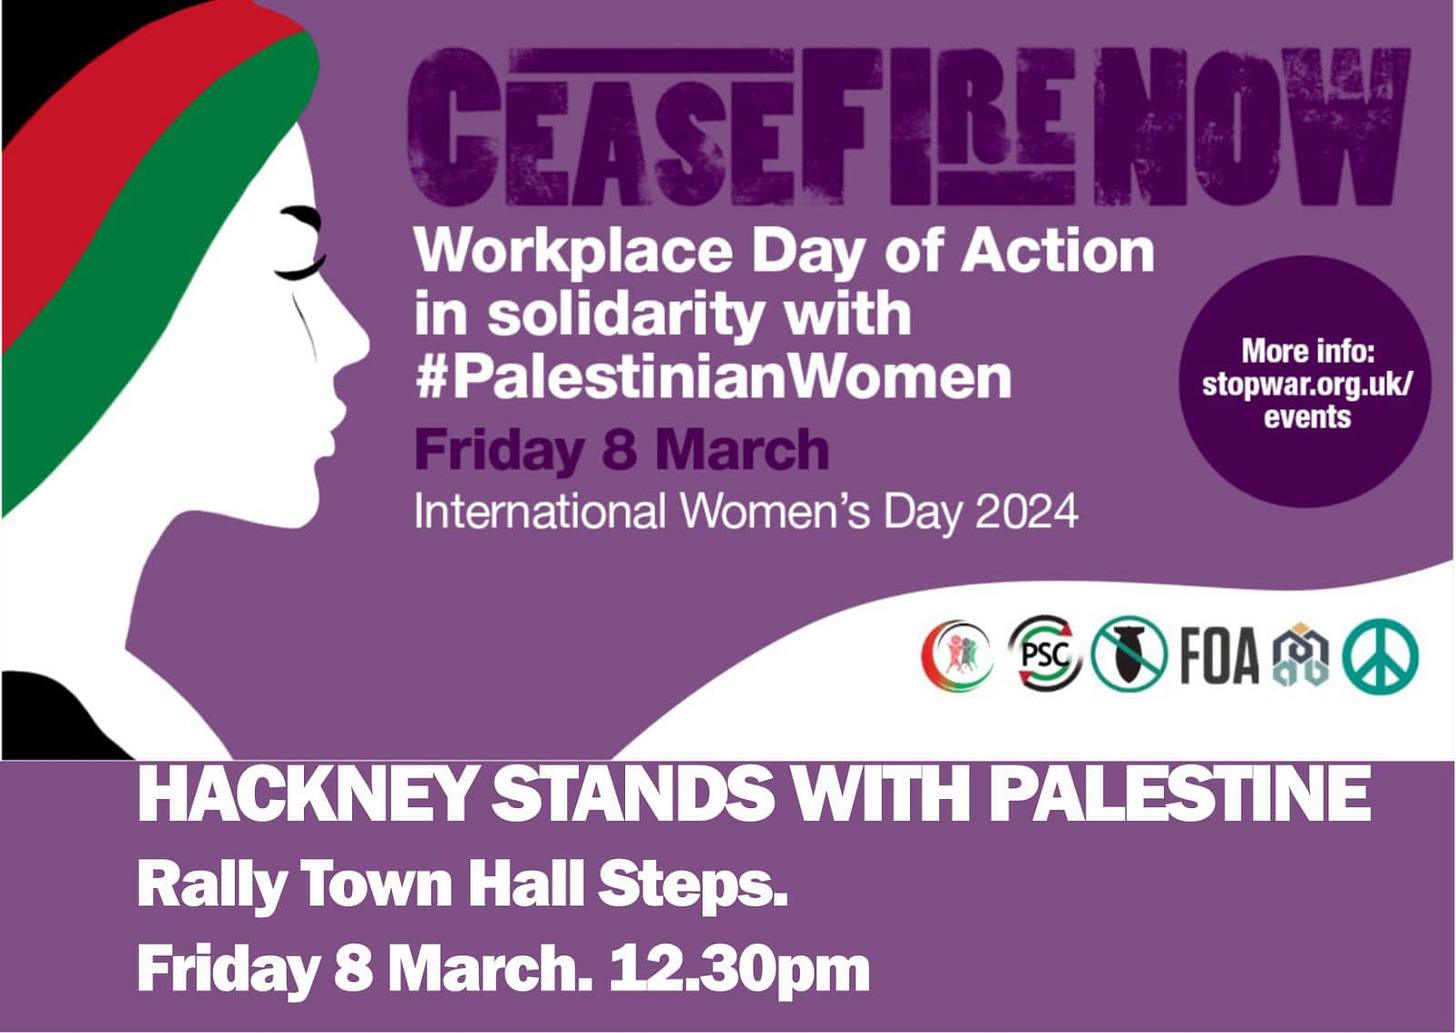 May be an image of text that says "CEASEFI CEASEFIRENOW Workplace Day of Action in solidarity with #PalestinianWomen Friday 8 March International Women's Day 2024 More info: stopwar.org.uk/ events FOA HACKNEY STANDS WITH PALESTINE Rally Town Hall Steps. Friday 8 March. 12.30pm"